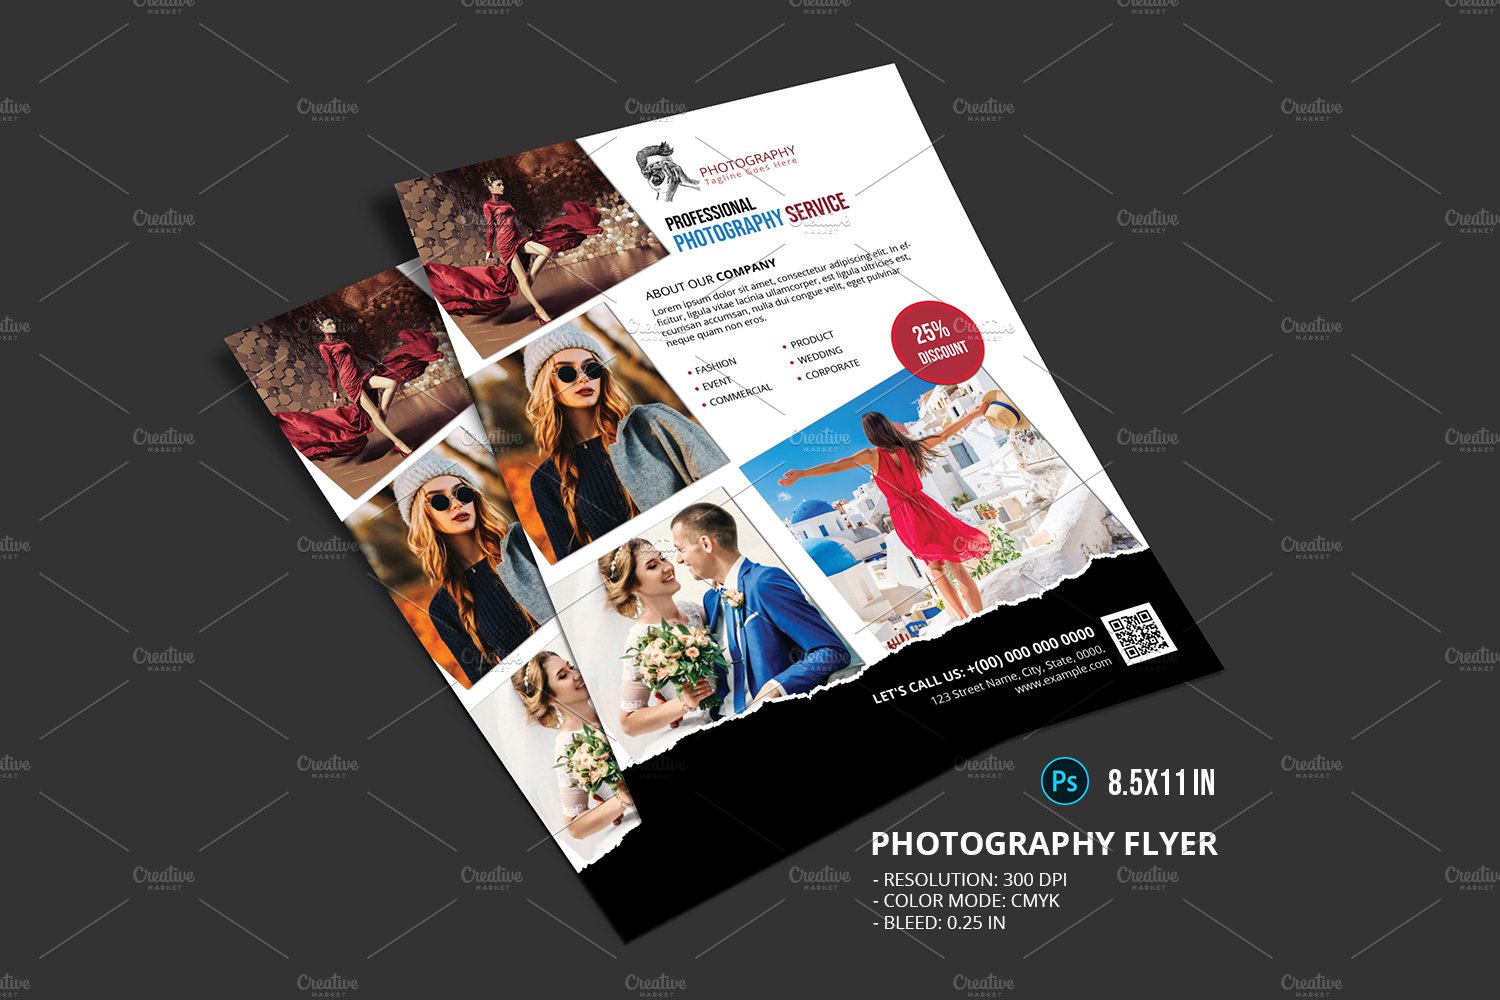 Photography Flyer Template V12 cover image.